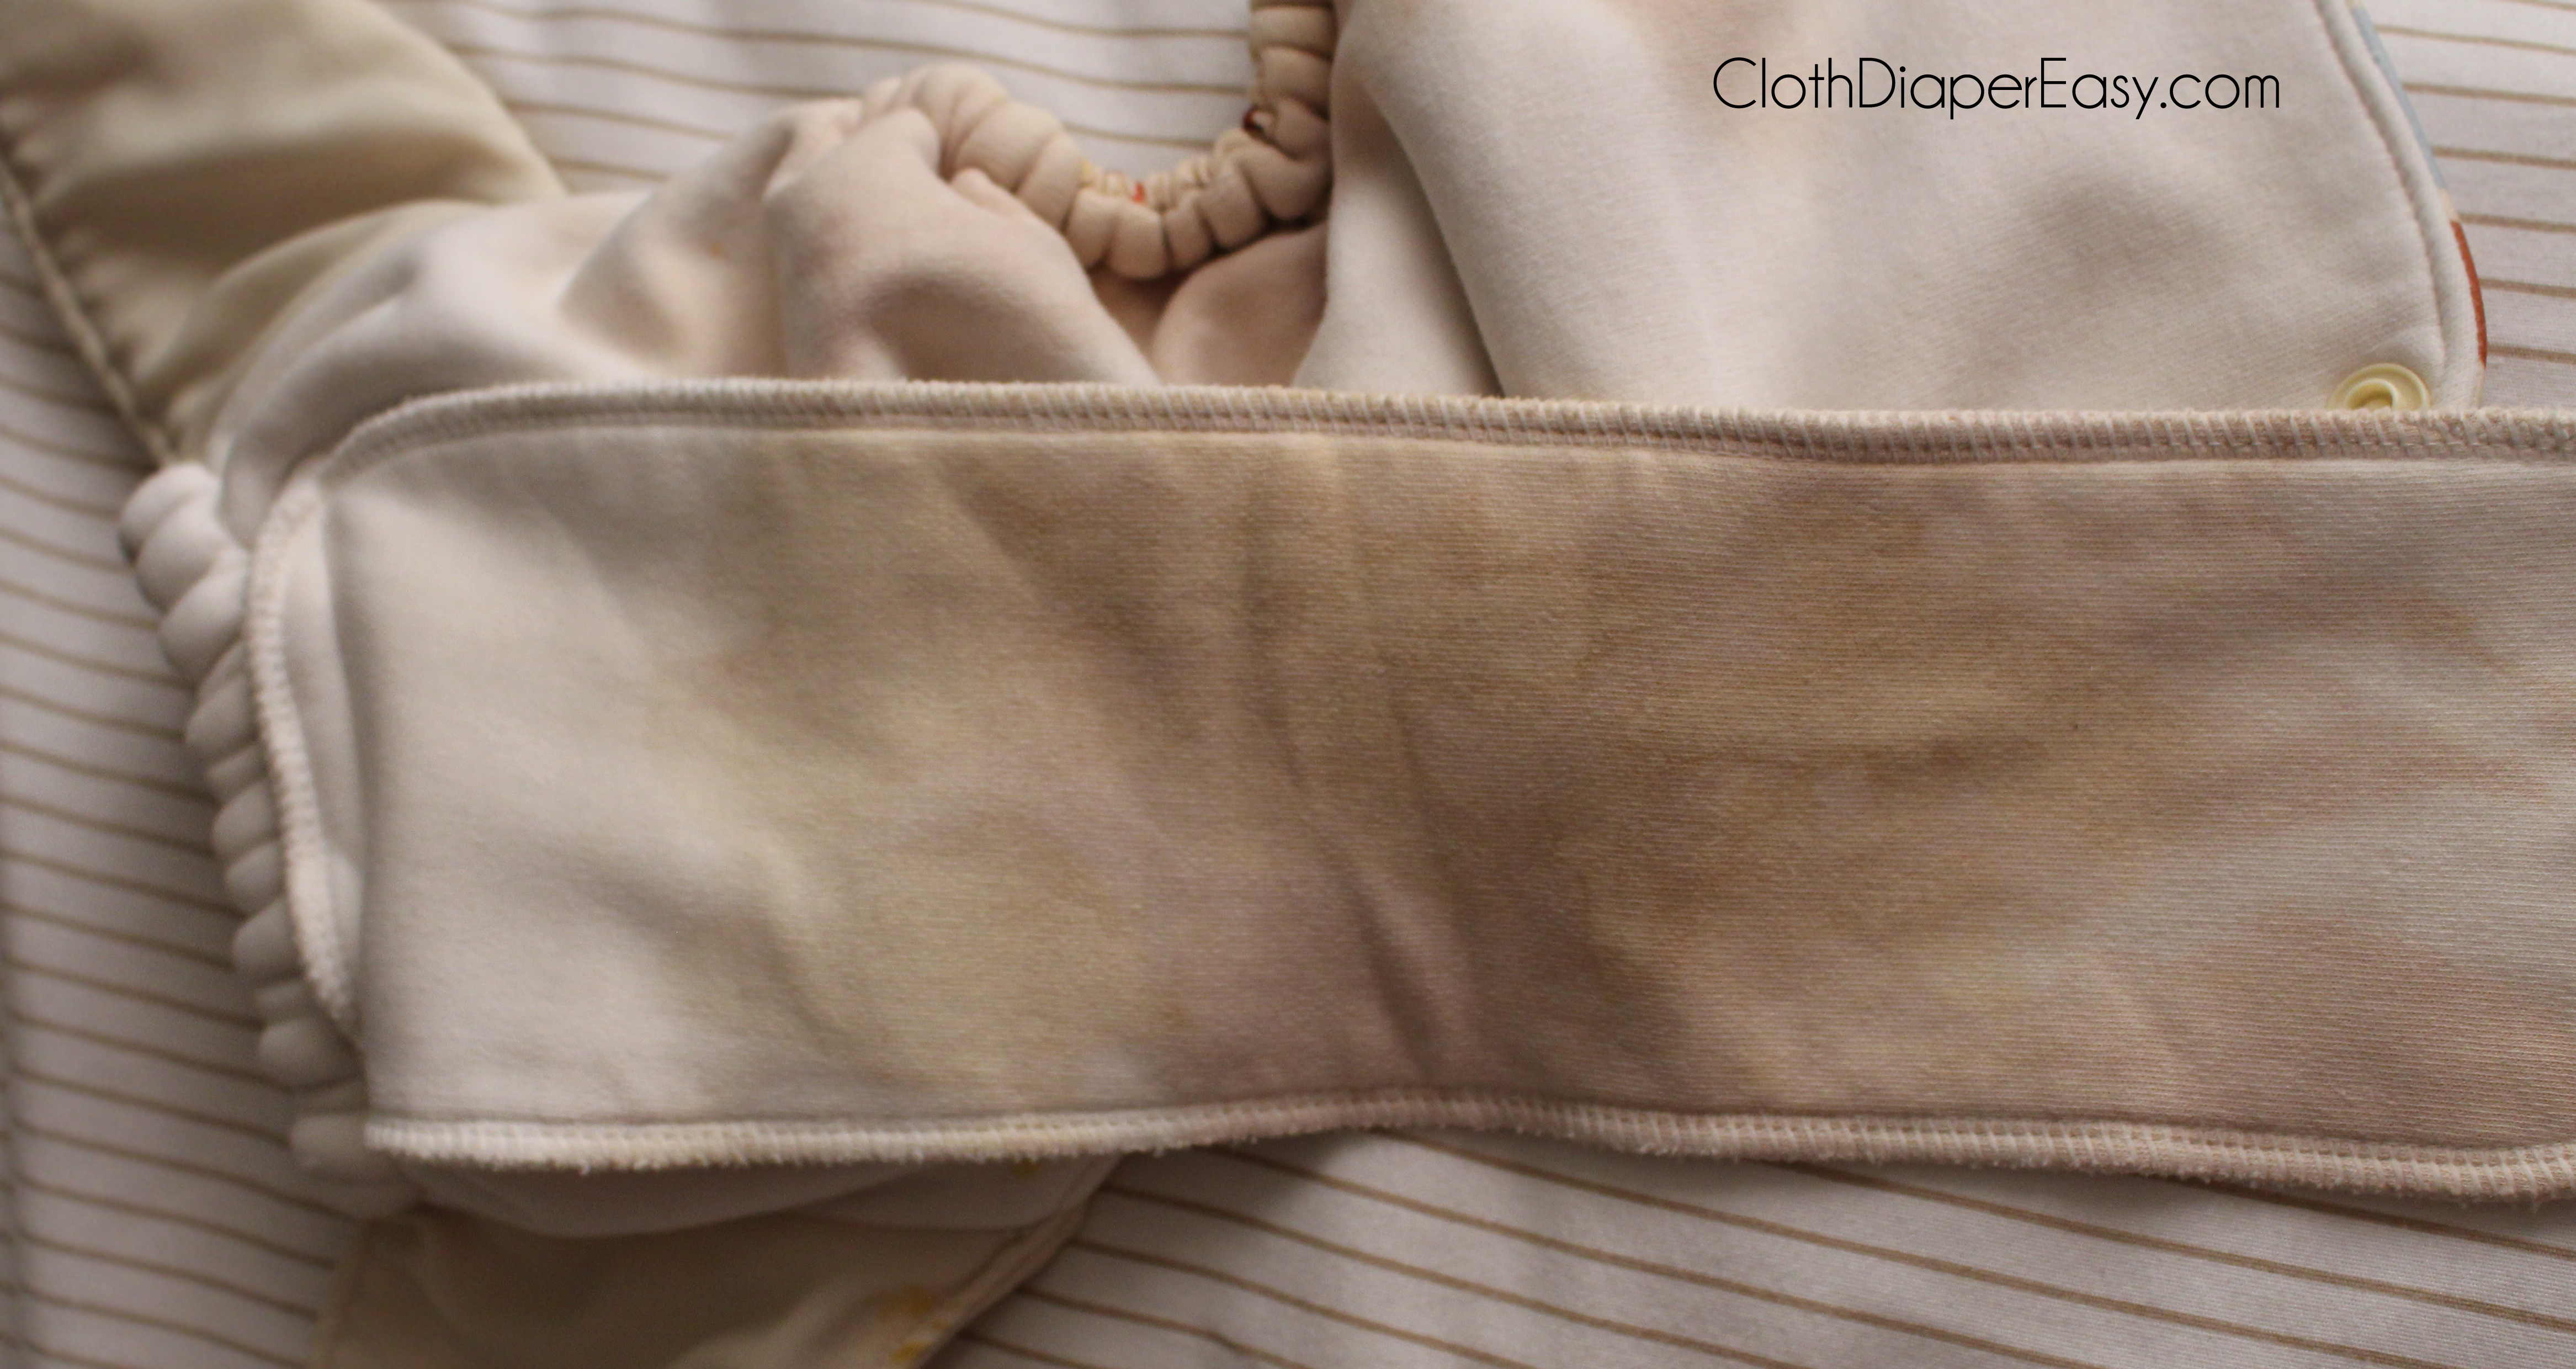 How To Get Stains Out Of Cloth Diapers